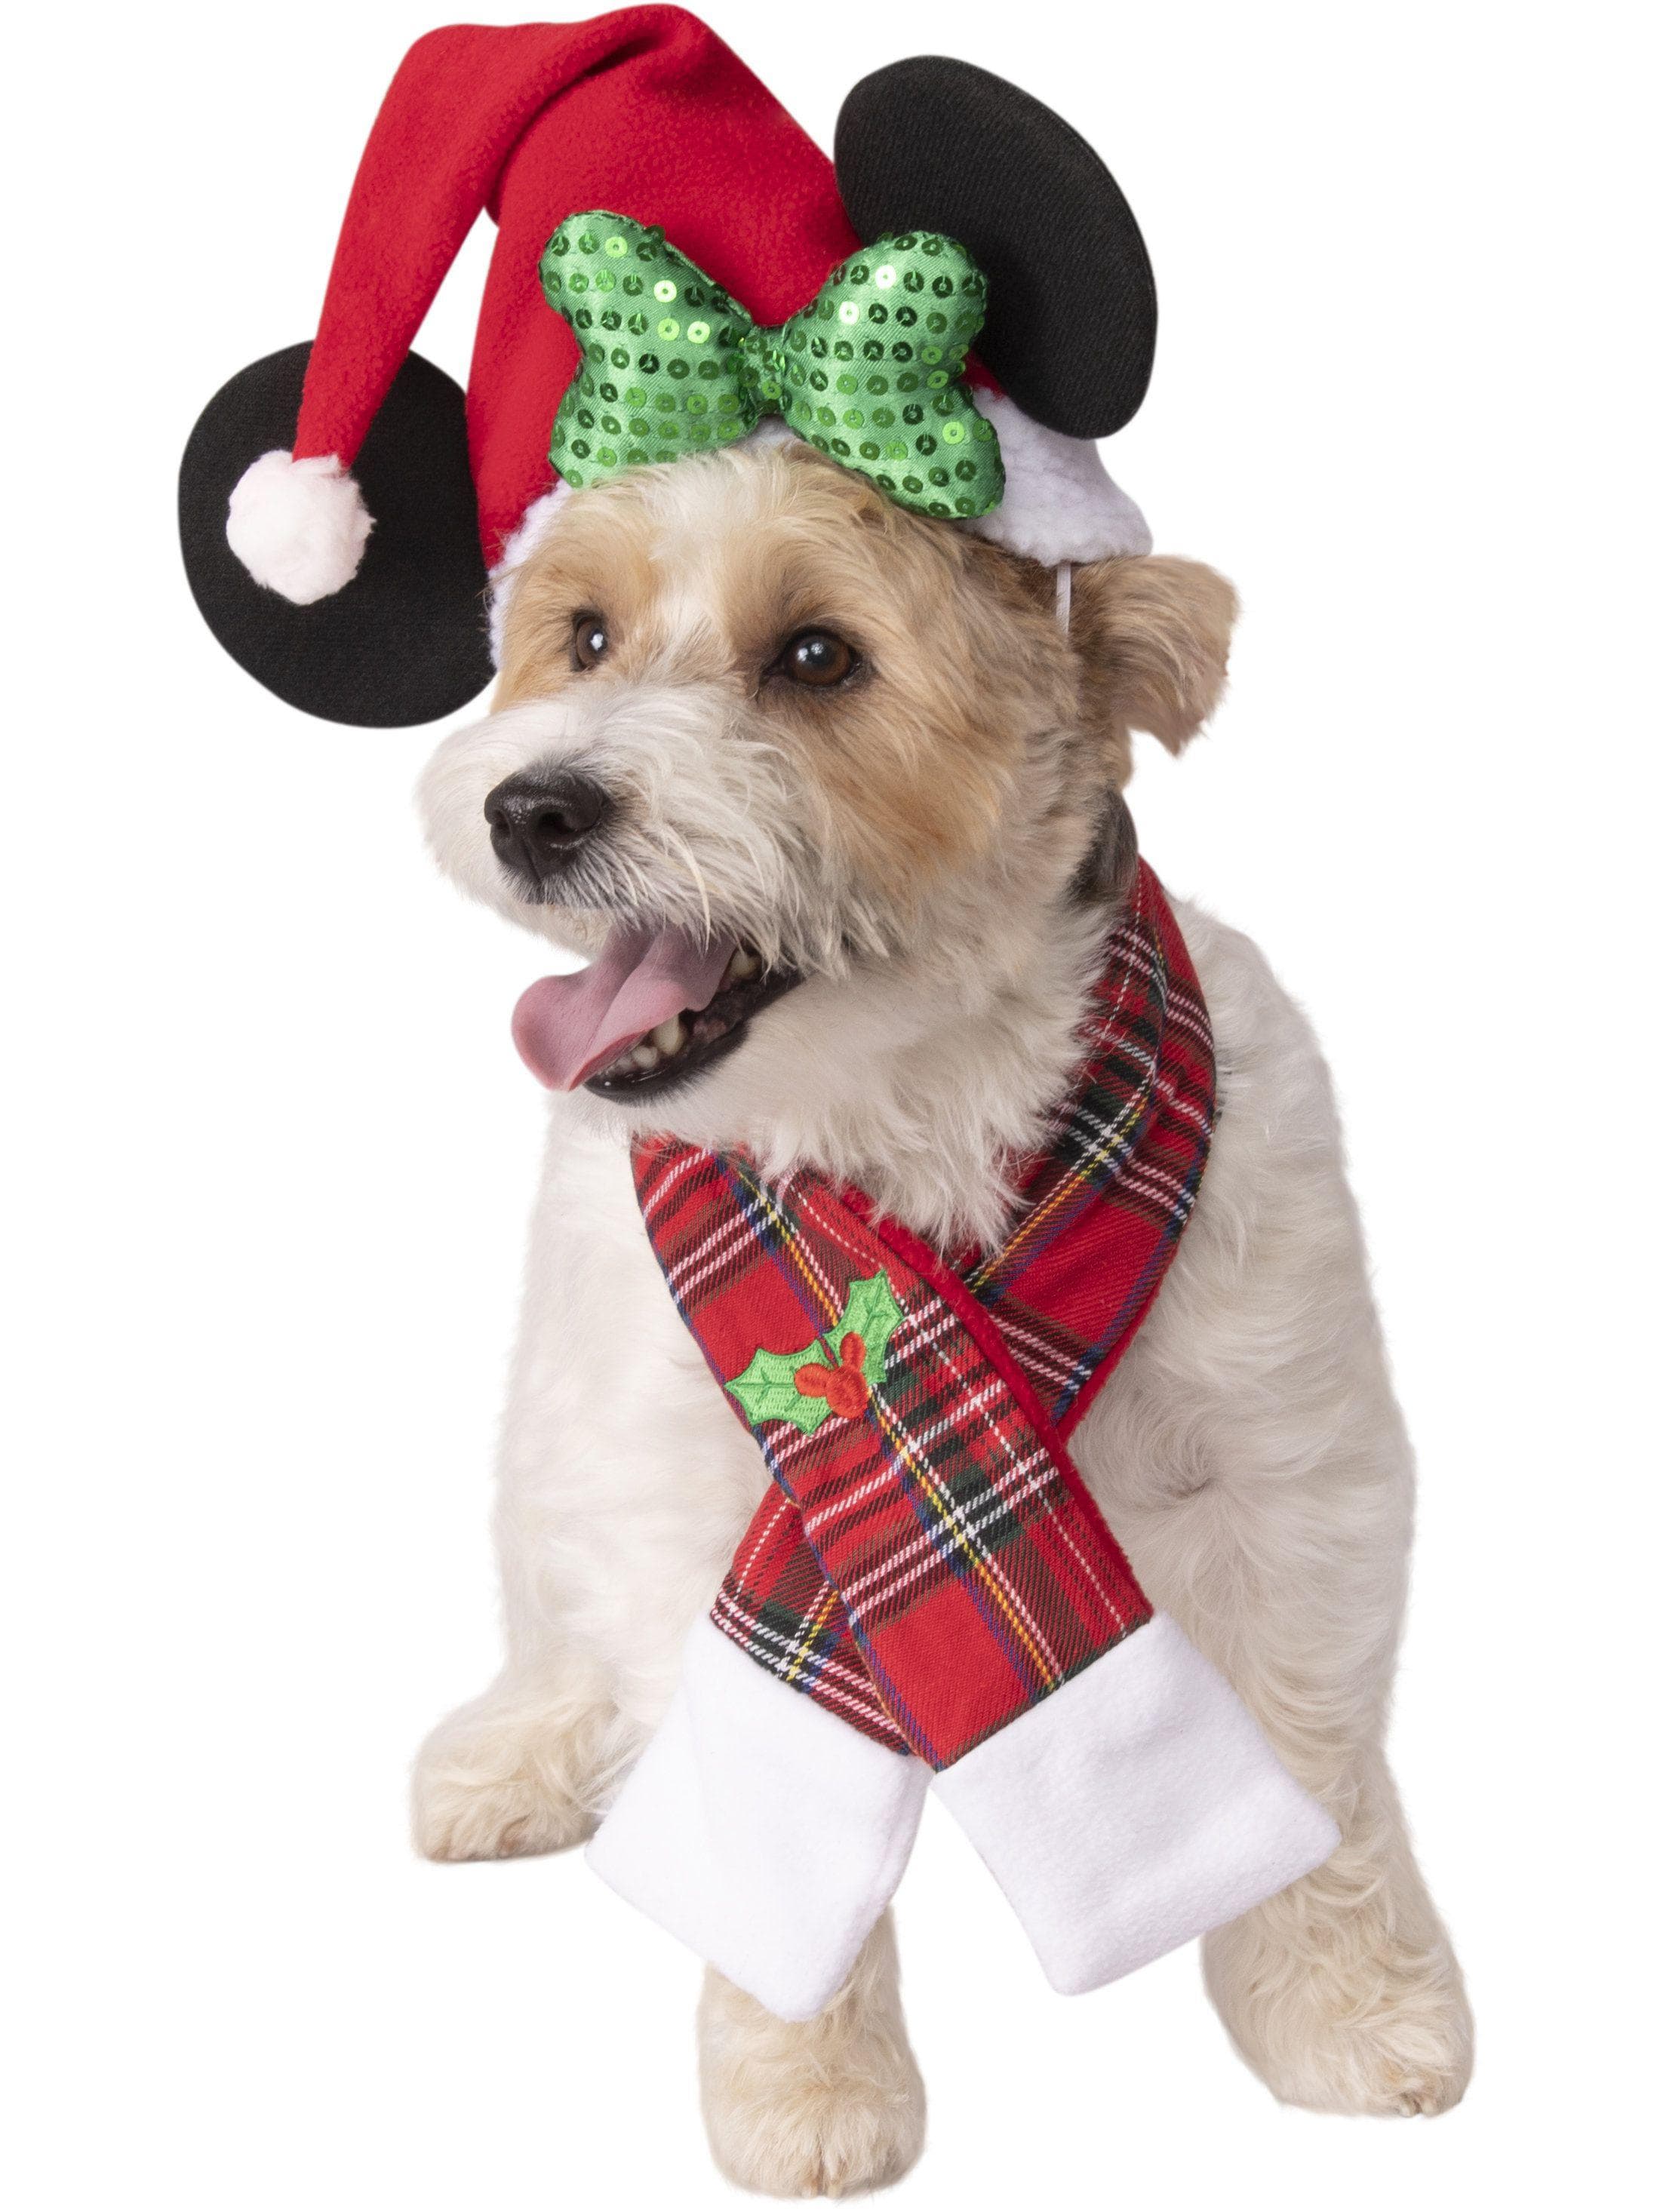 Minnie Mouse Pet Santa Hat and Scarf - costumes.com